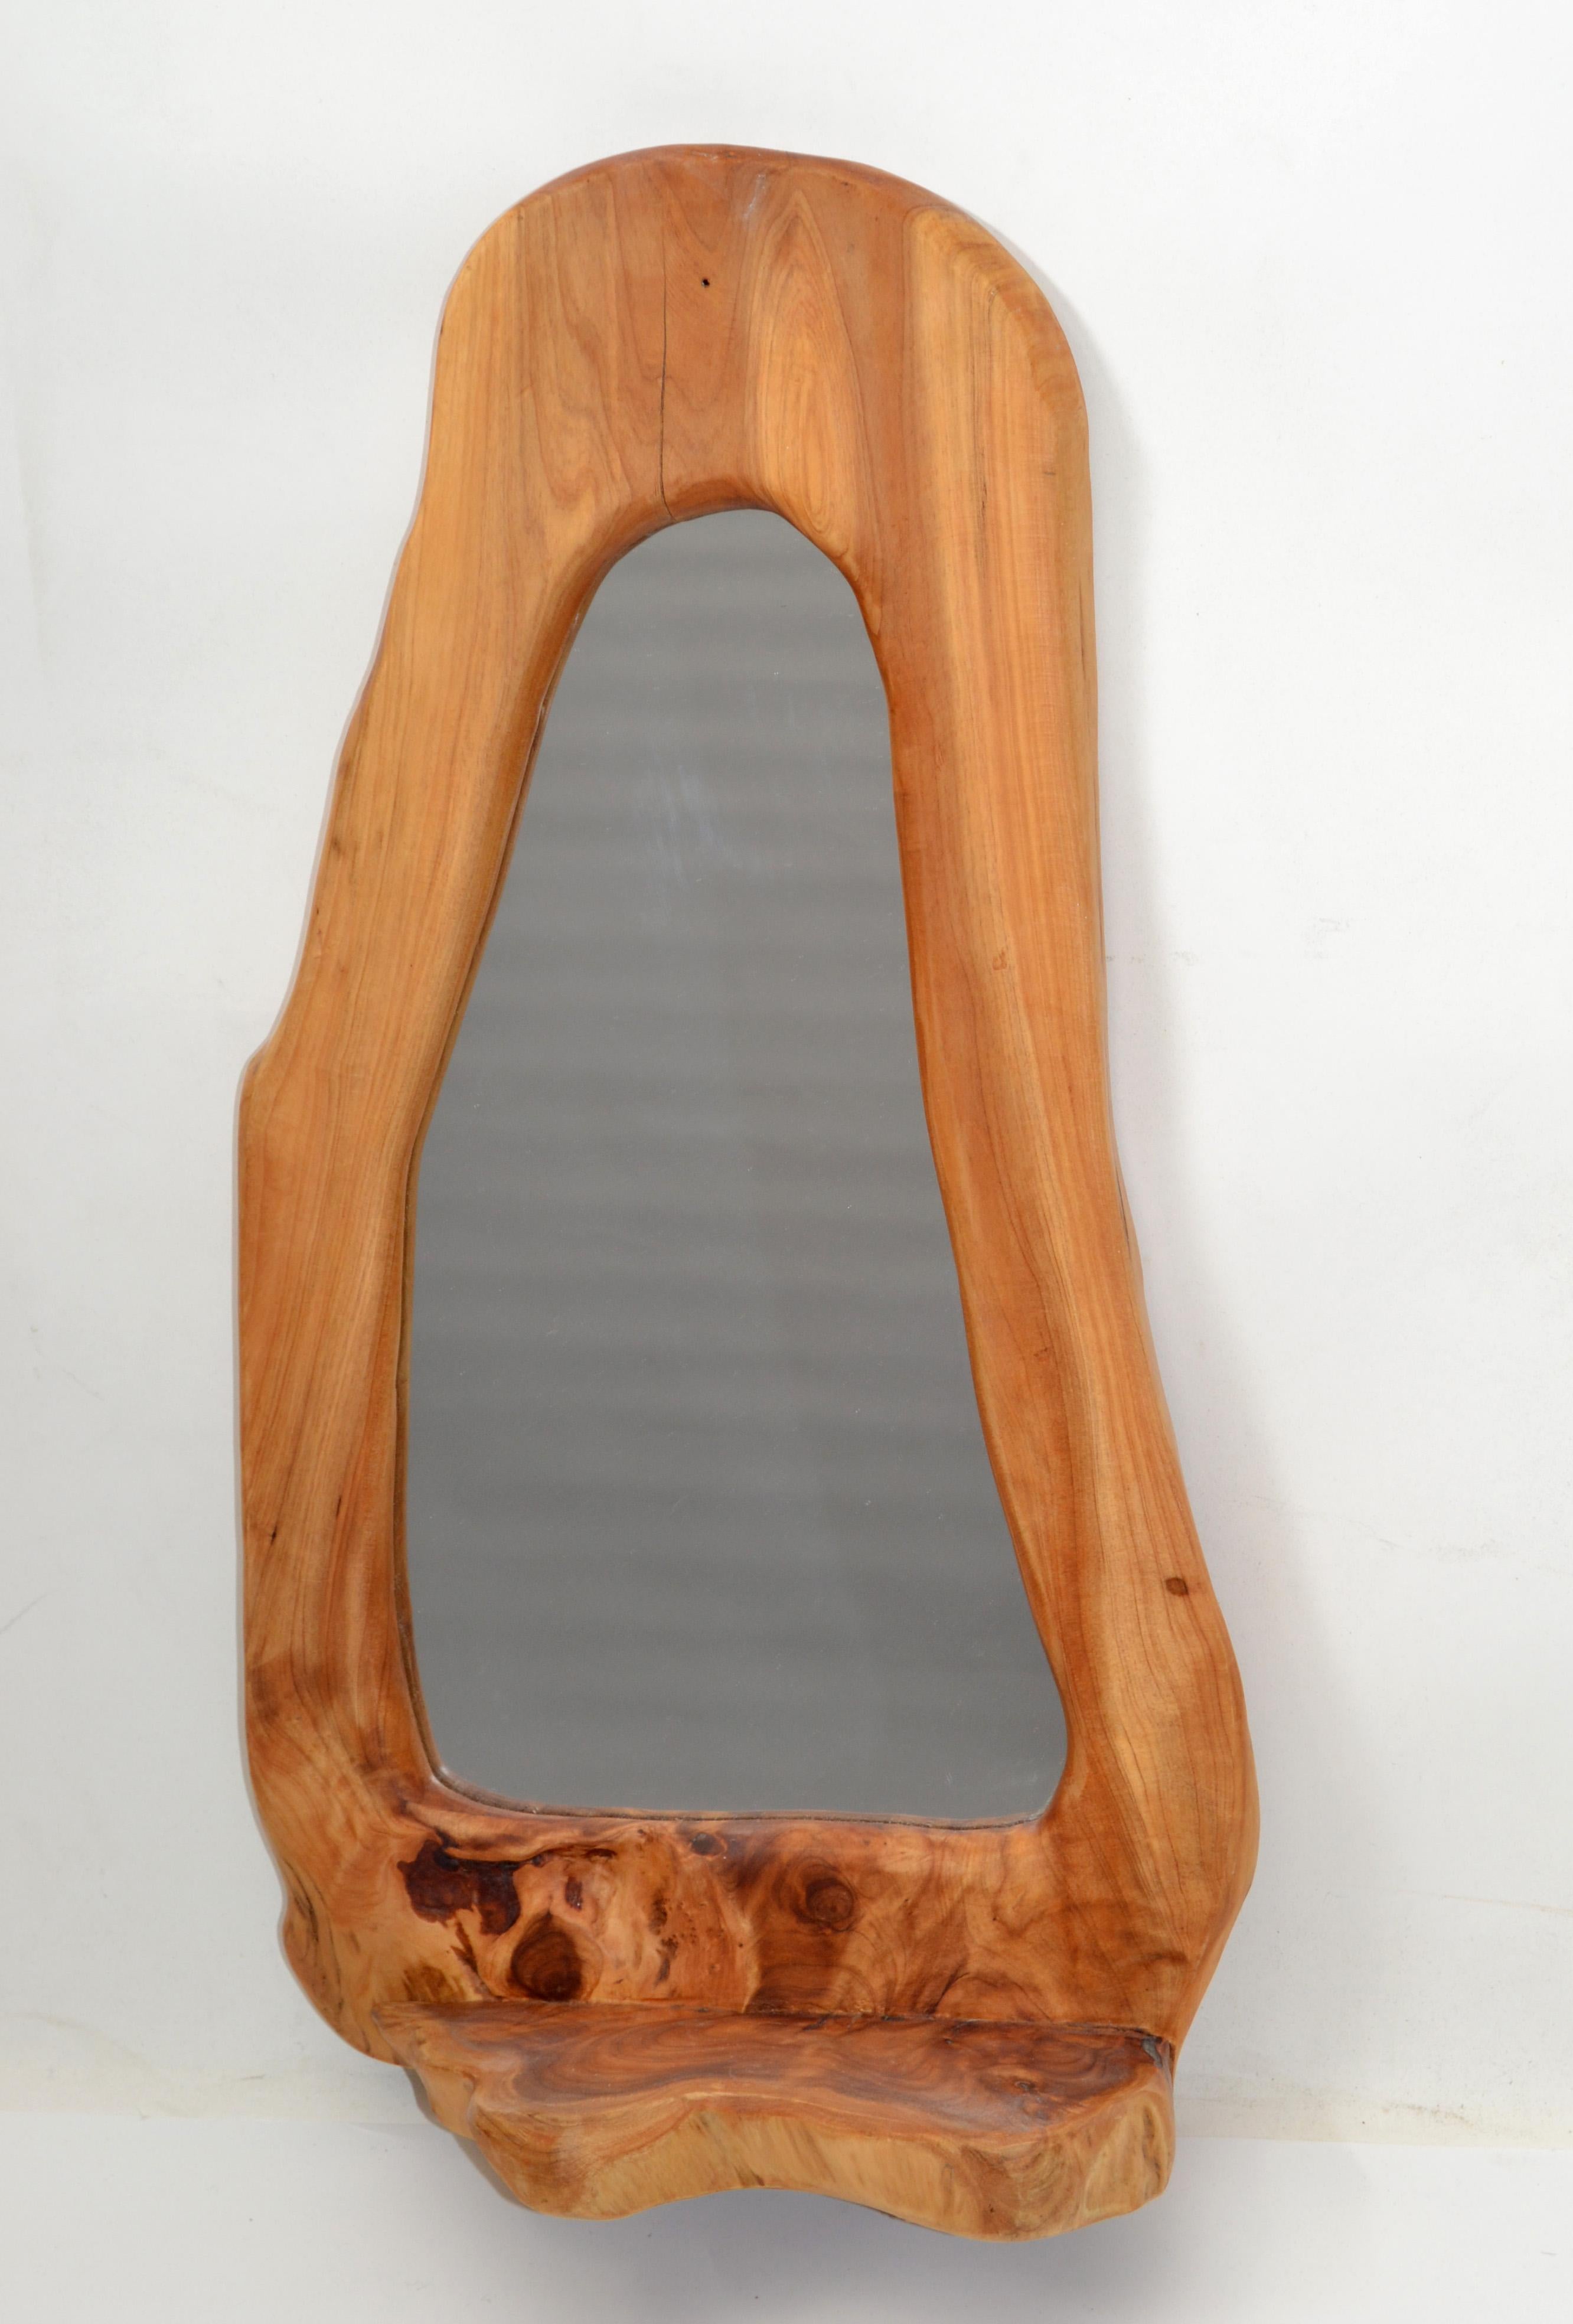 Hand-Crafted Organic Vintage American Rectangular Wall Mirror in Natural Burl Wood 1970 For Sale